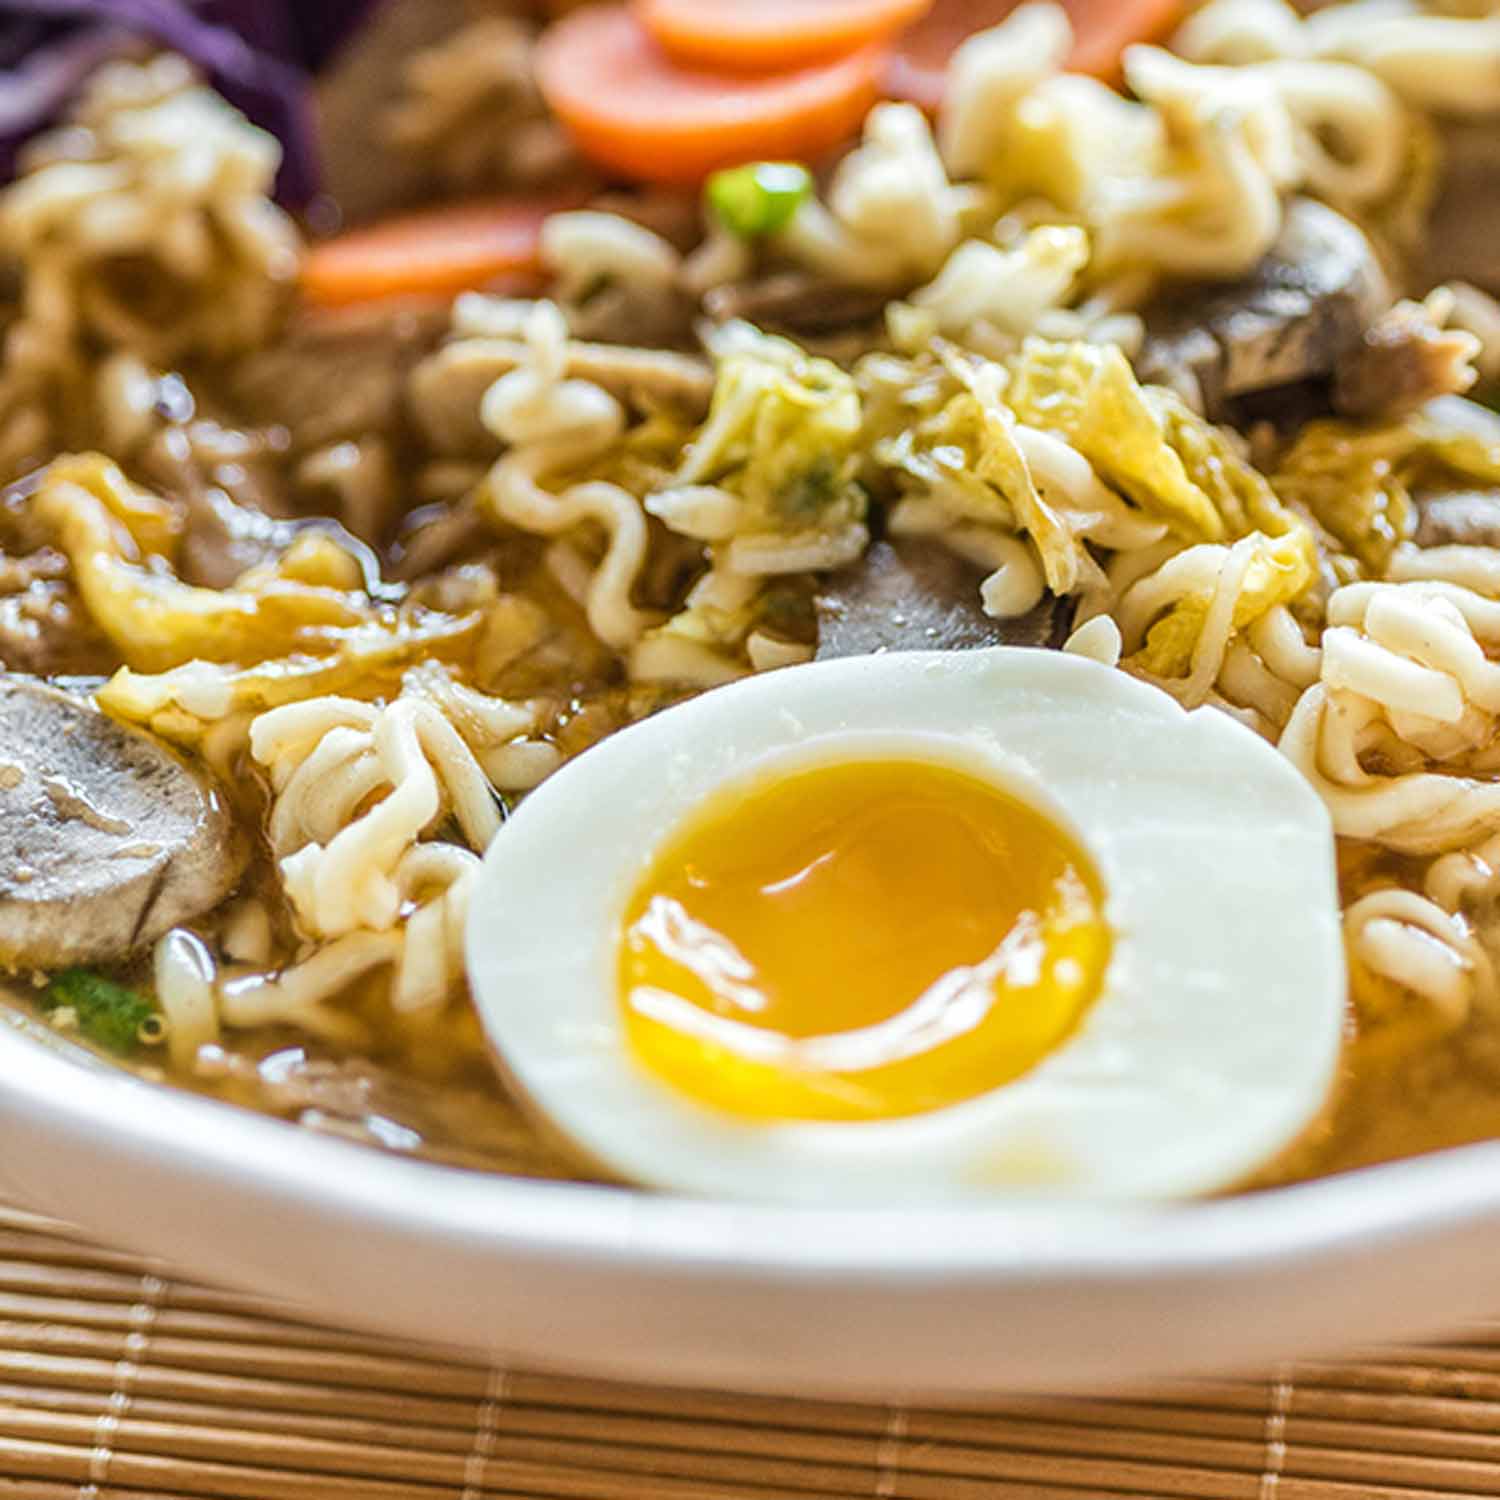 soft boiled eggs are the perfect addition to ramen